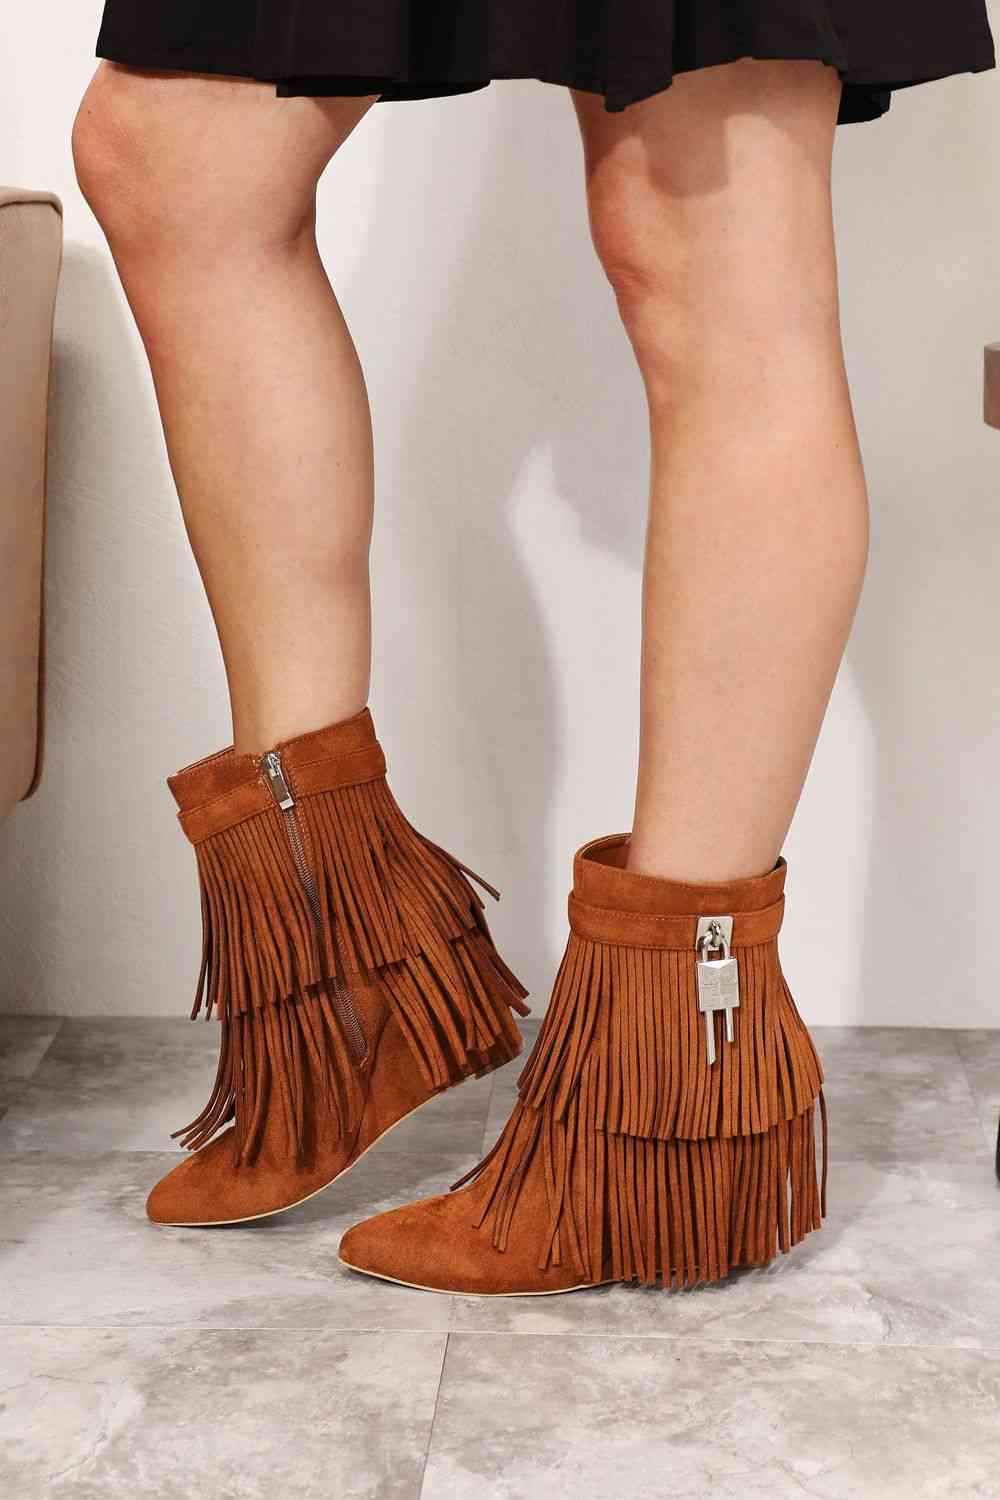 Legend Women's Tassel Wedge Heel Ankle Booties by Trendsi, tan vegan suede ankle booties with a fringe accent, featuring an open shank design.